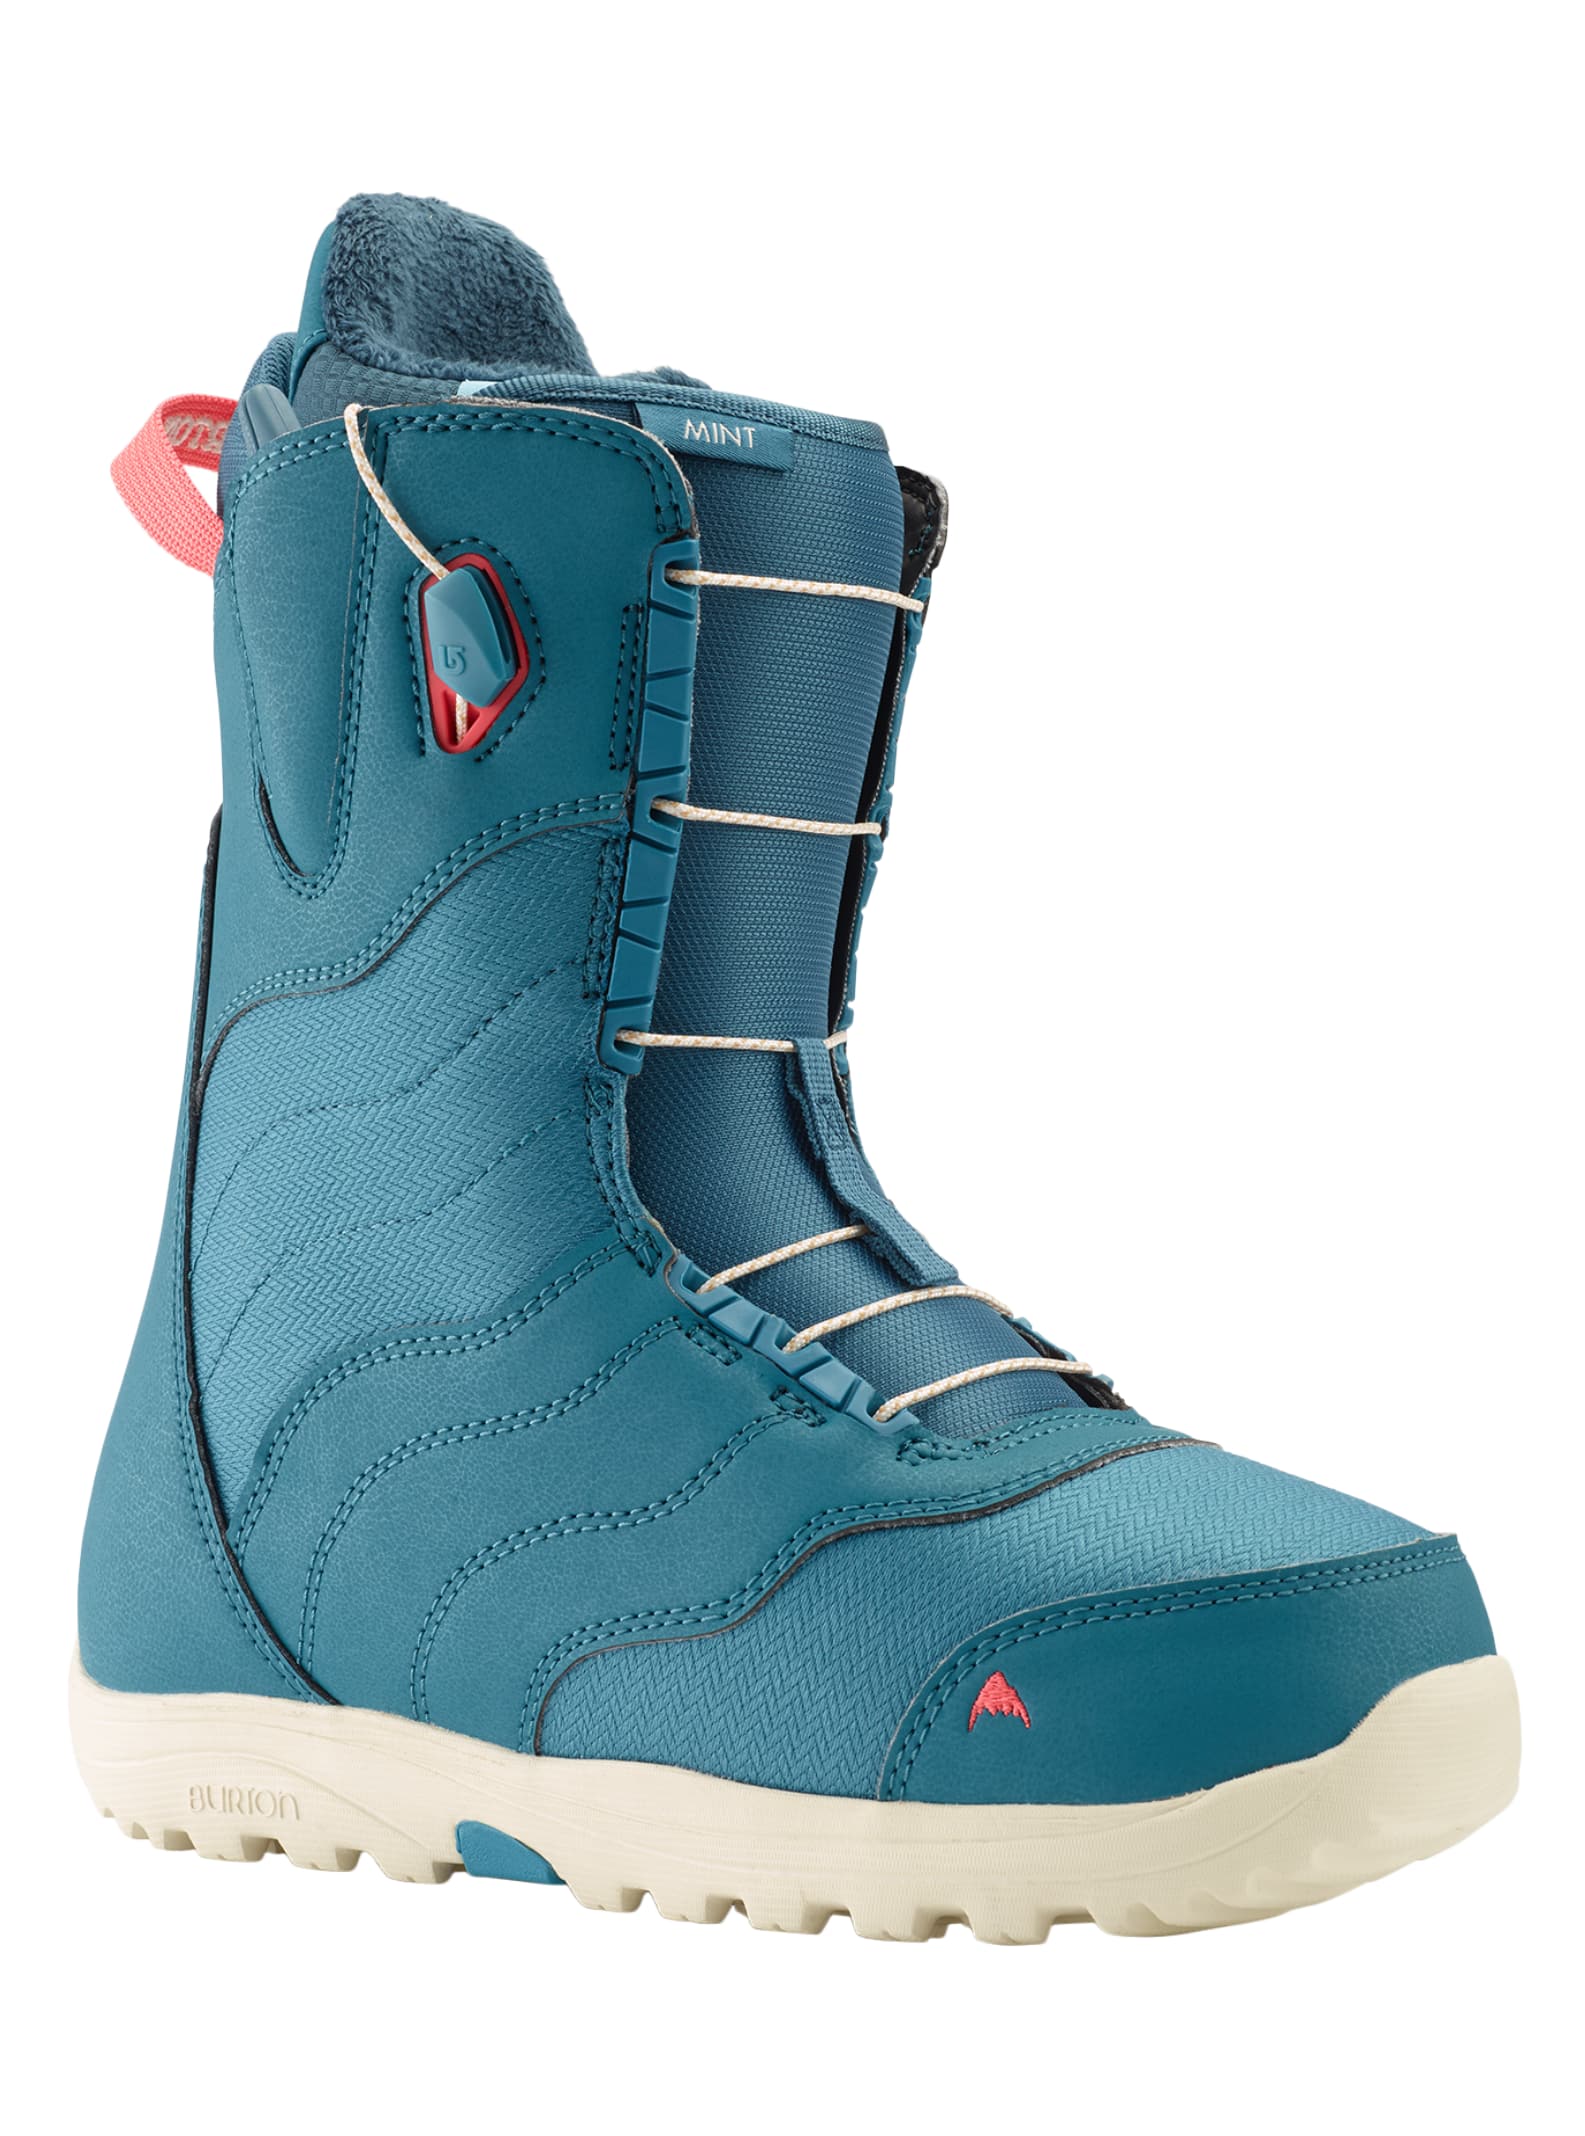 womens snowboard boots clearance